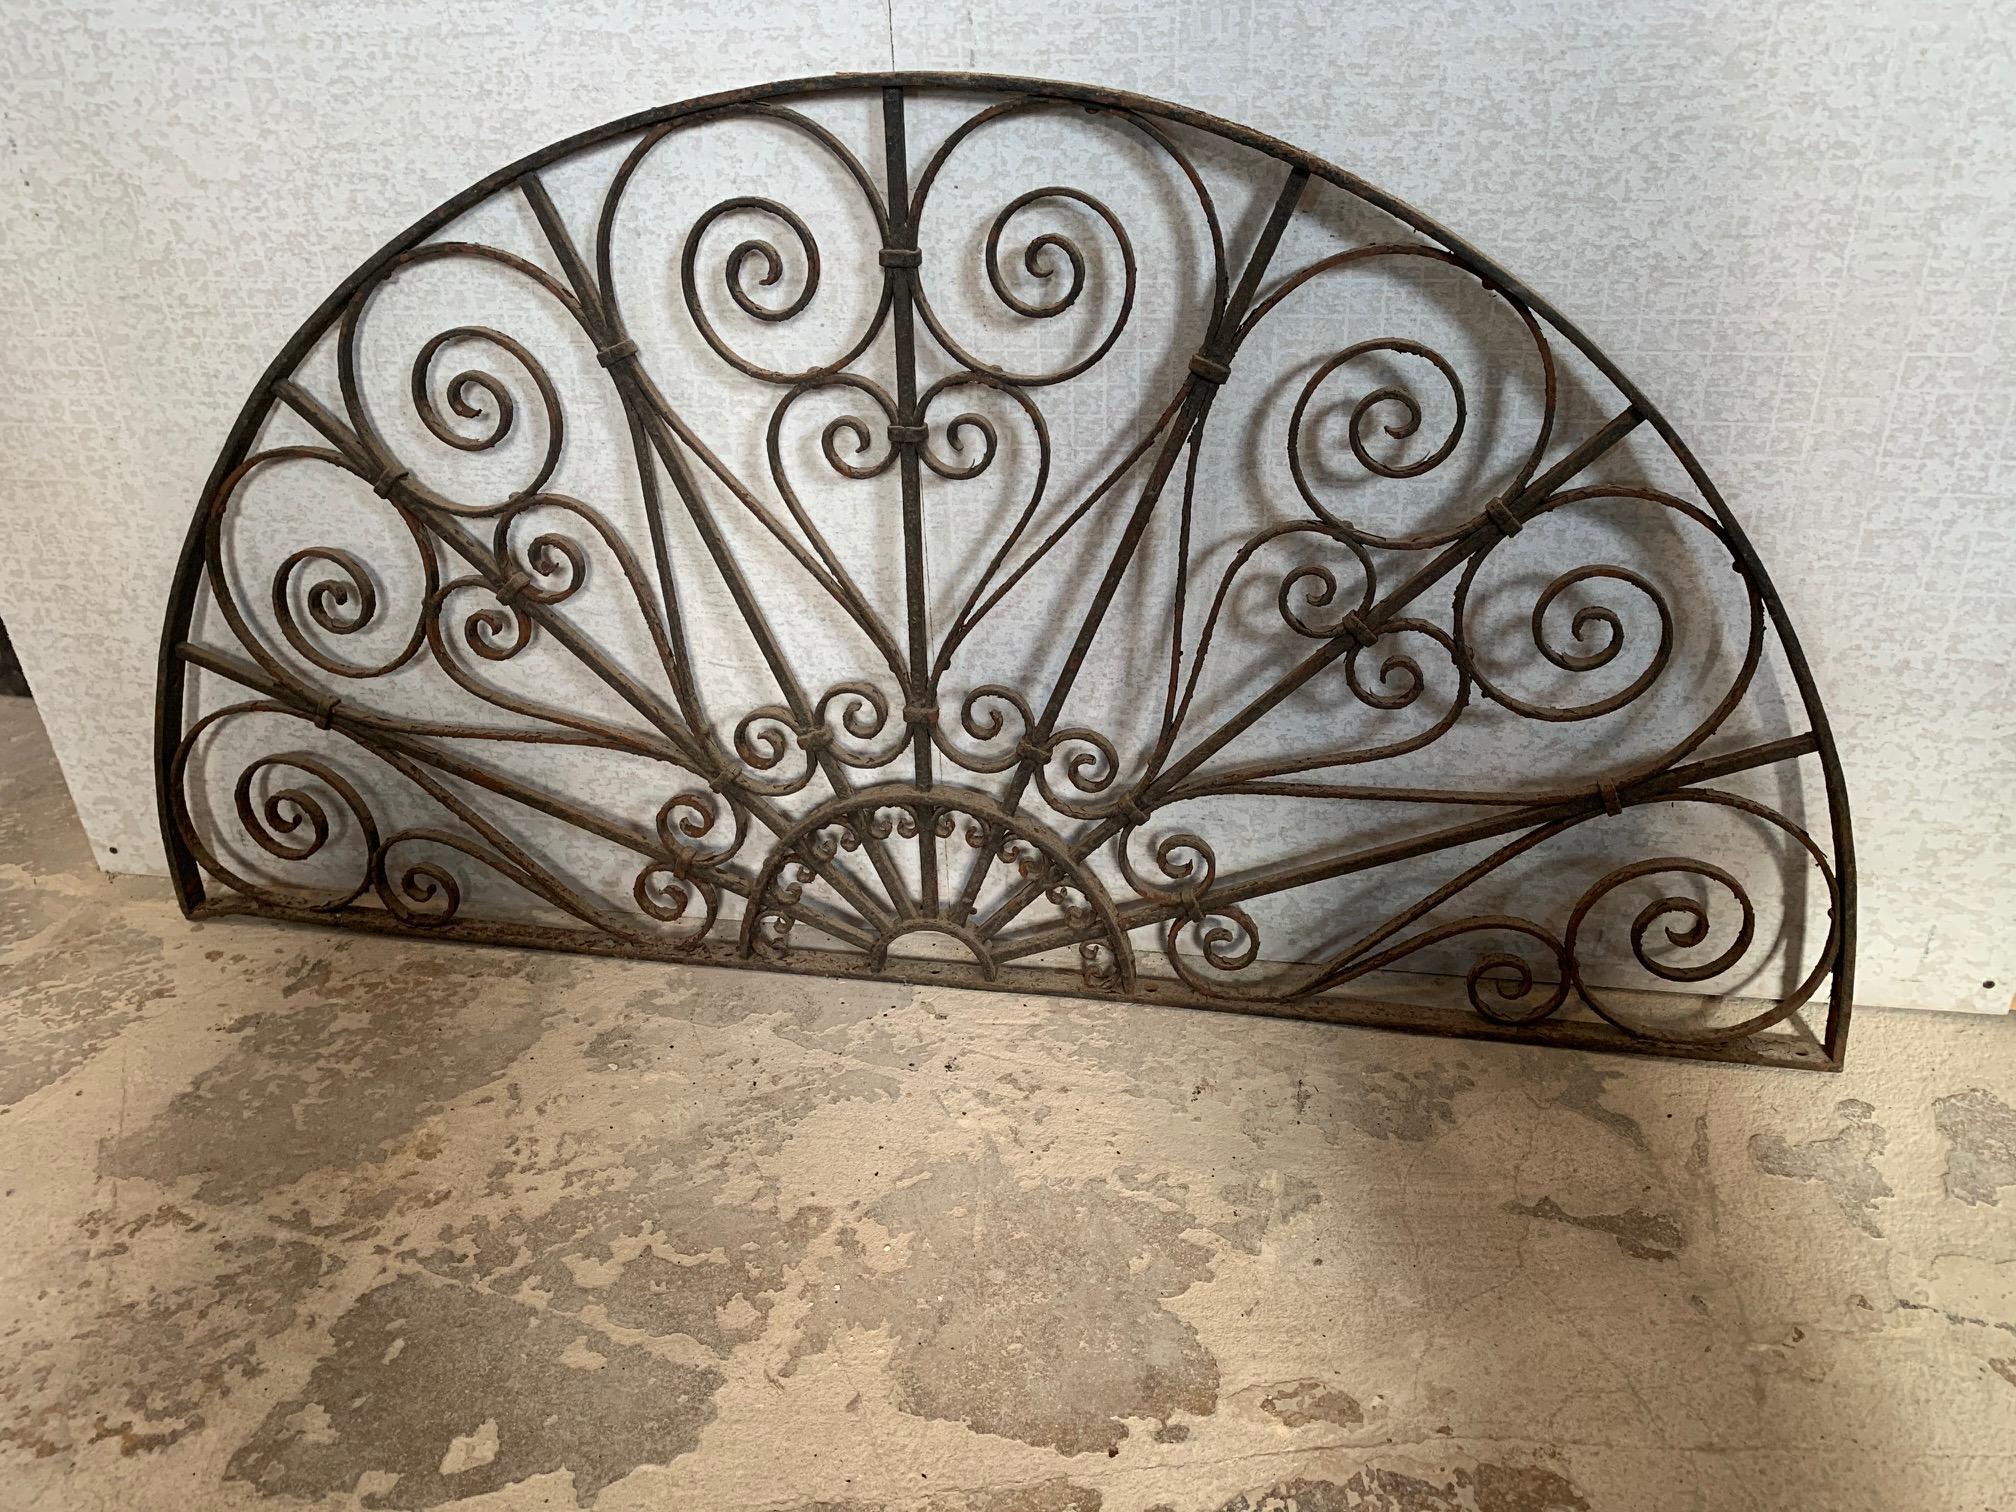 Arched ironwork features landed and riveted components. Metal work is structurally sound with no losses.